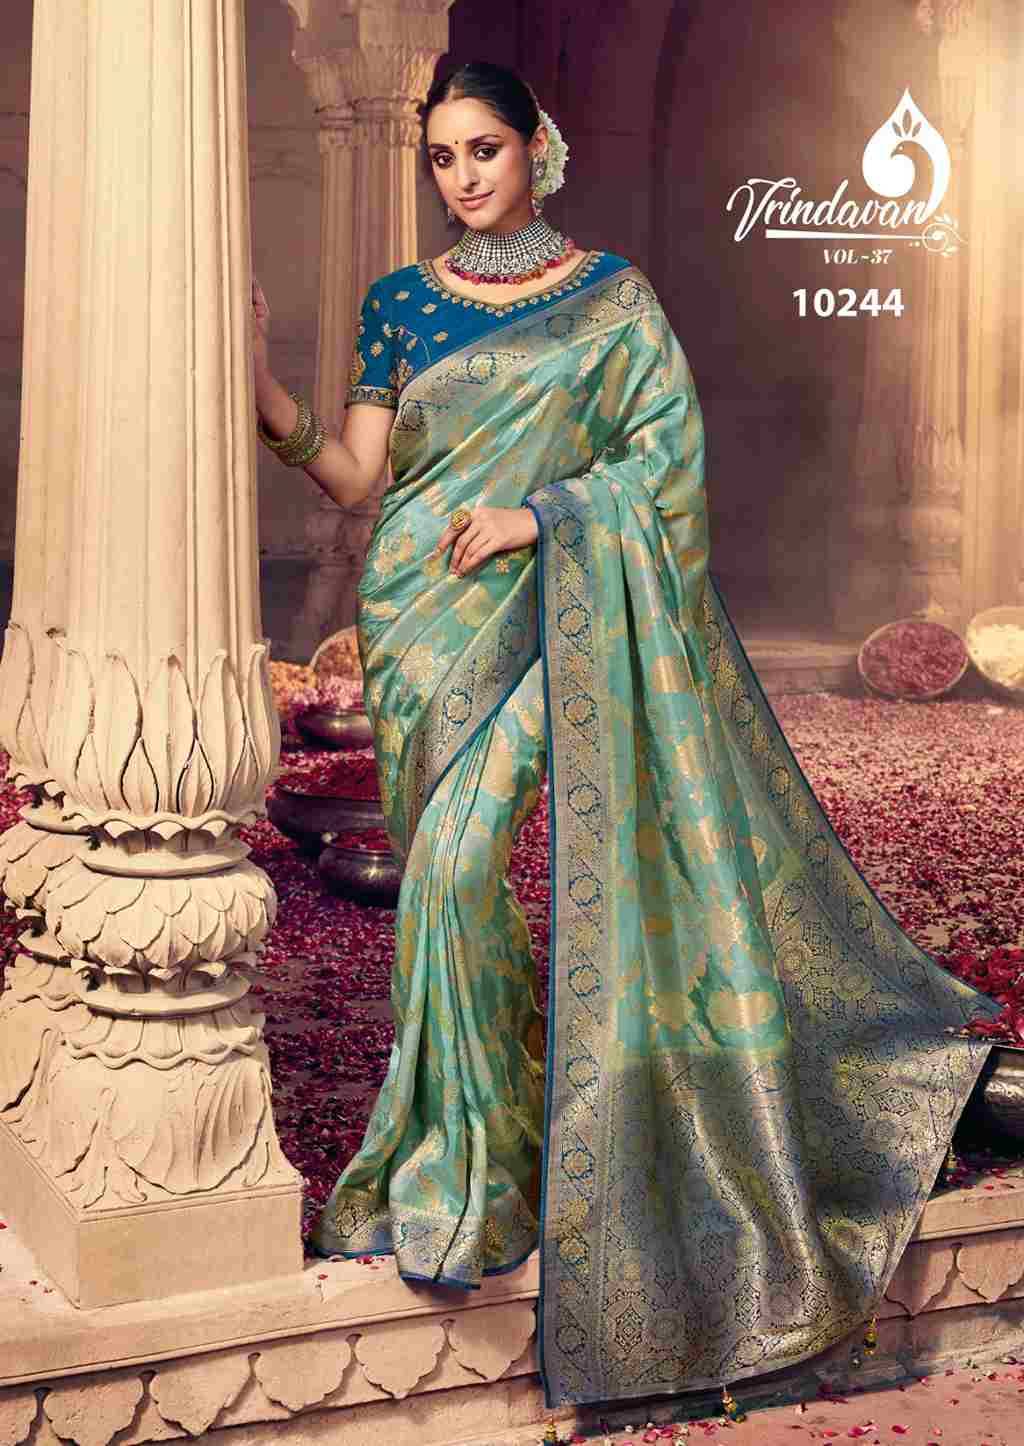 Vrindavan Vol-37 By Vrindavan 10240 To 10248 Series Indian Traditional Wear Collection Beautiful Stylish Fancy Colorful Party Wear & Occasional Wear Dola Silk Sarees At Wholesale Price